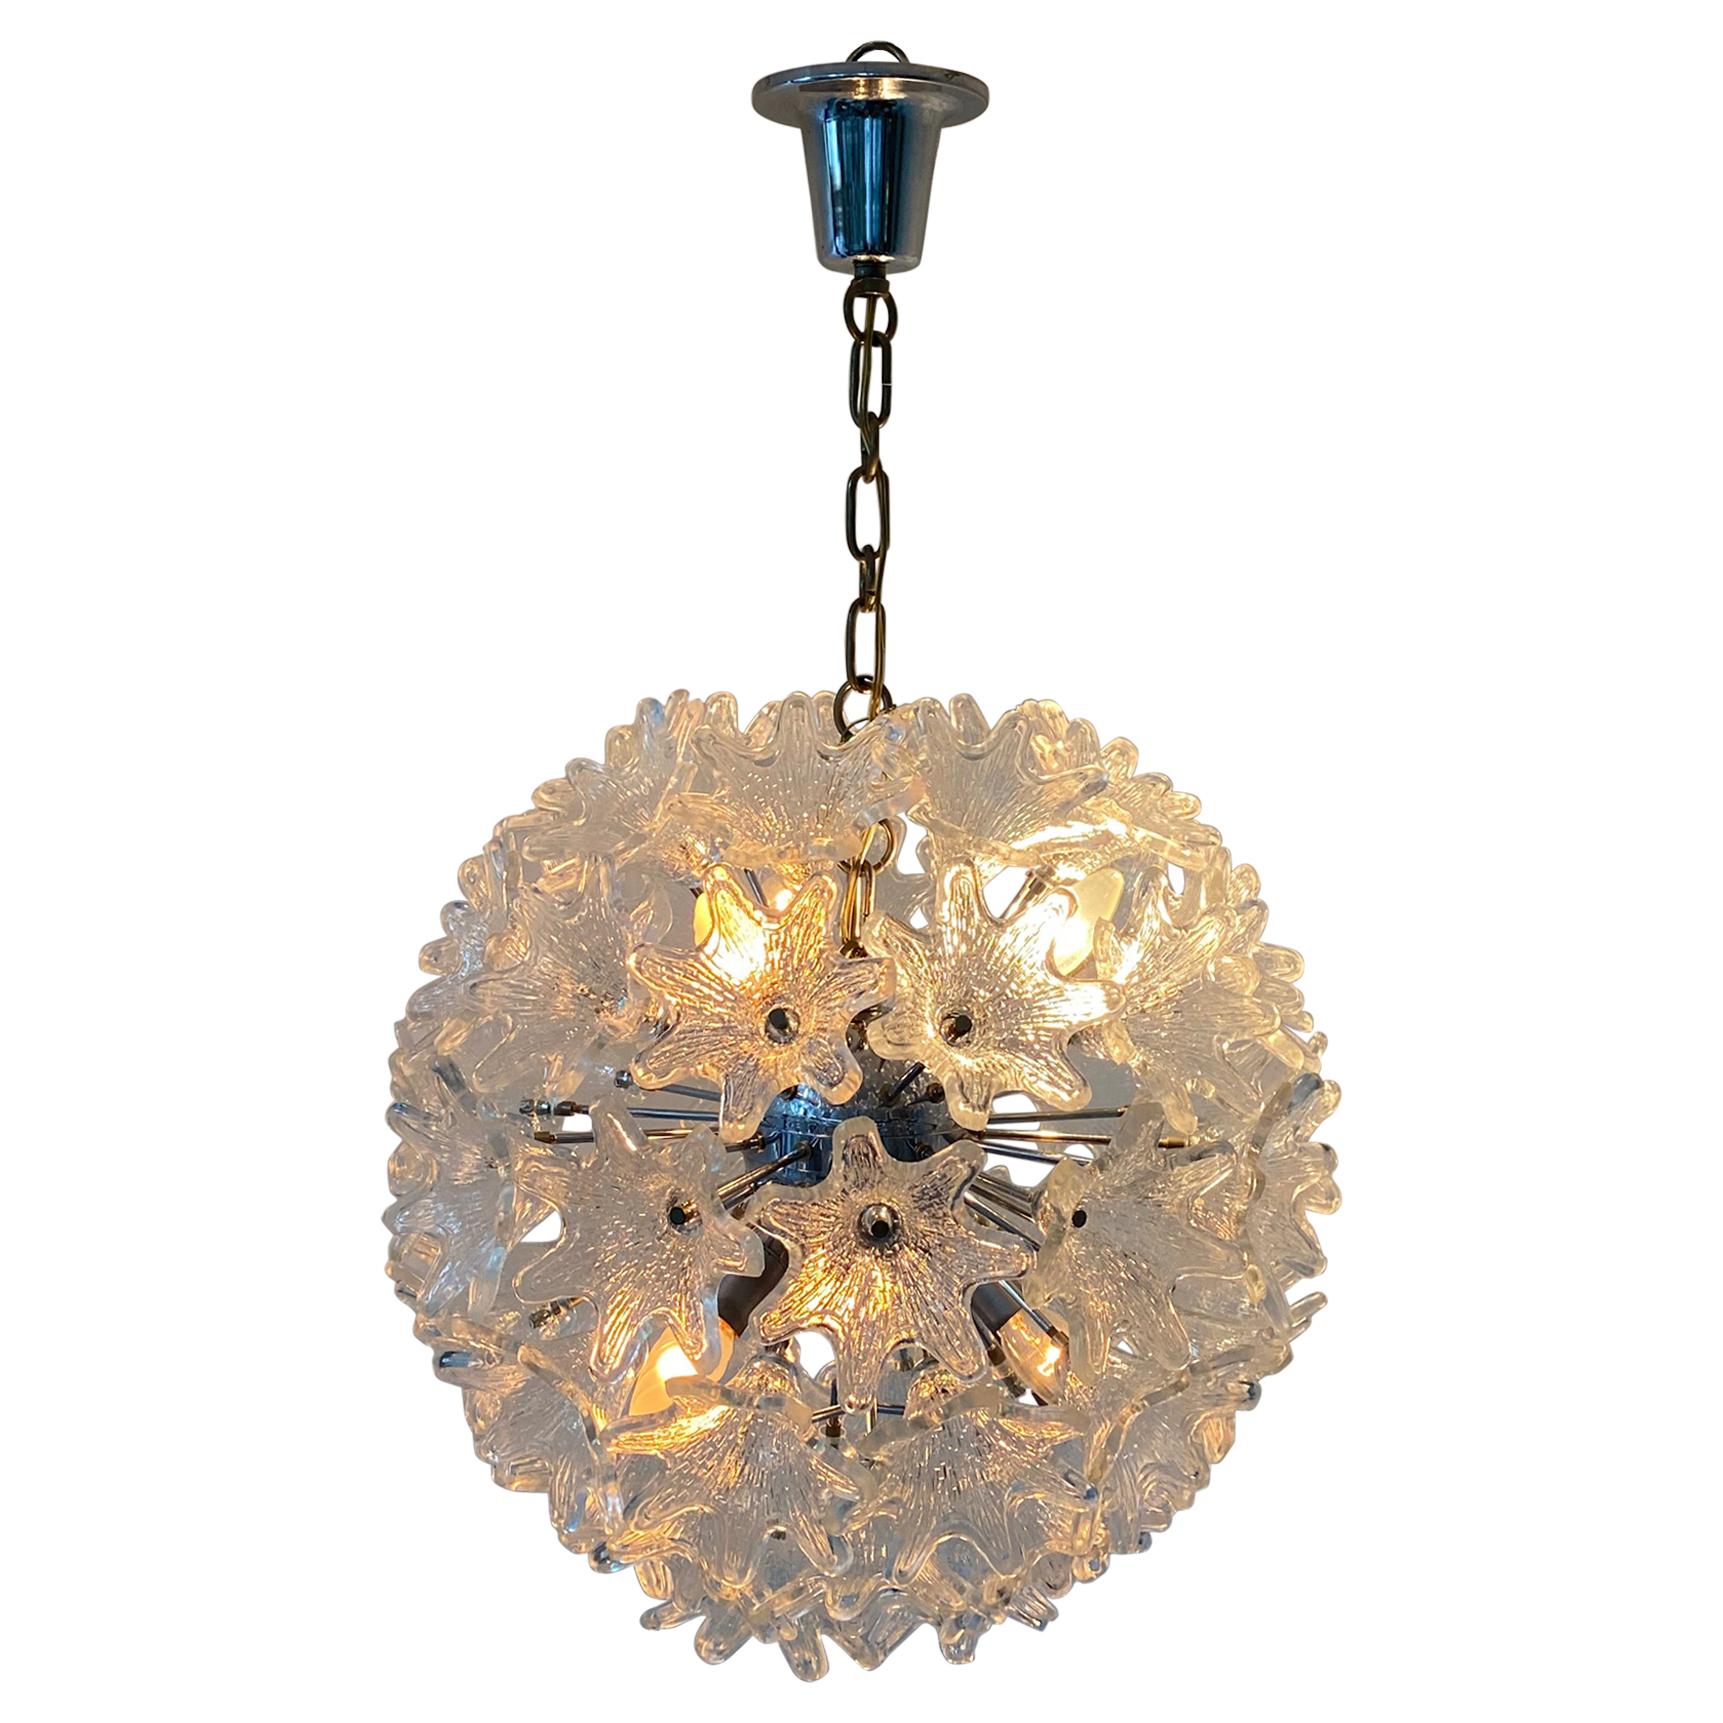 Space Age Large "Sputnik" Flower Chandelier by VeArt, Italy, Circa 1970 For Sale